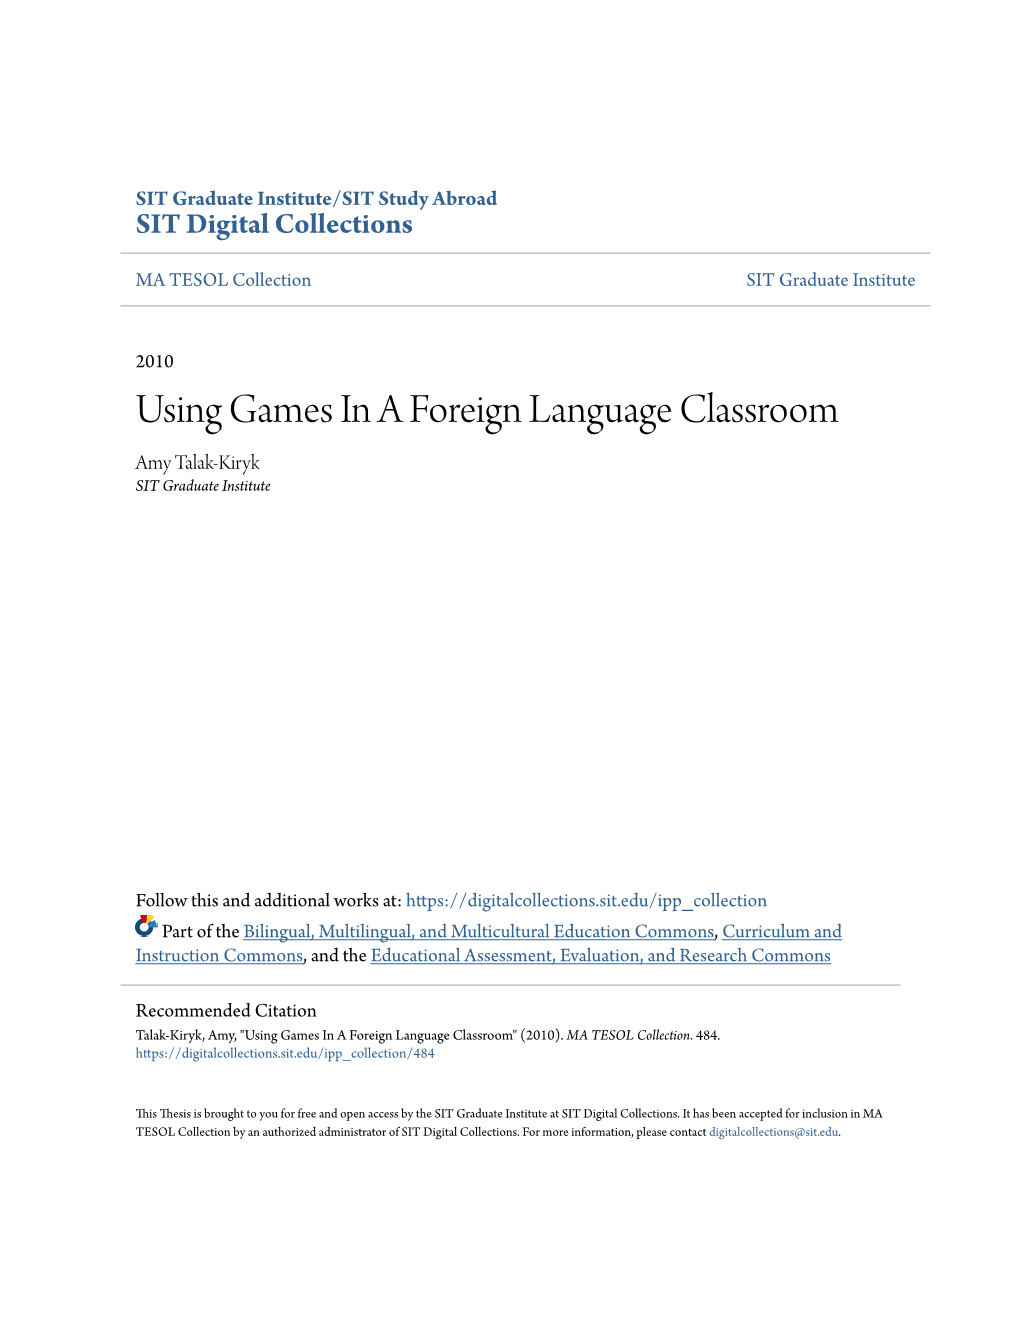 Using Games in a Foreign Language Classroom Amy Talak-Kiryk SIT Graduate Institute